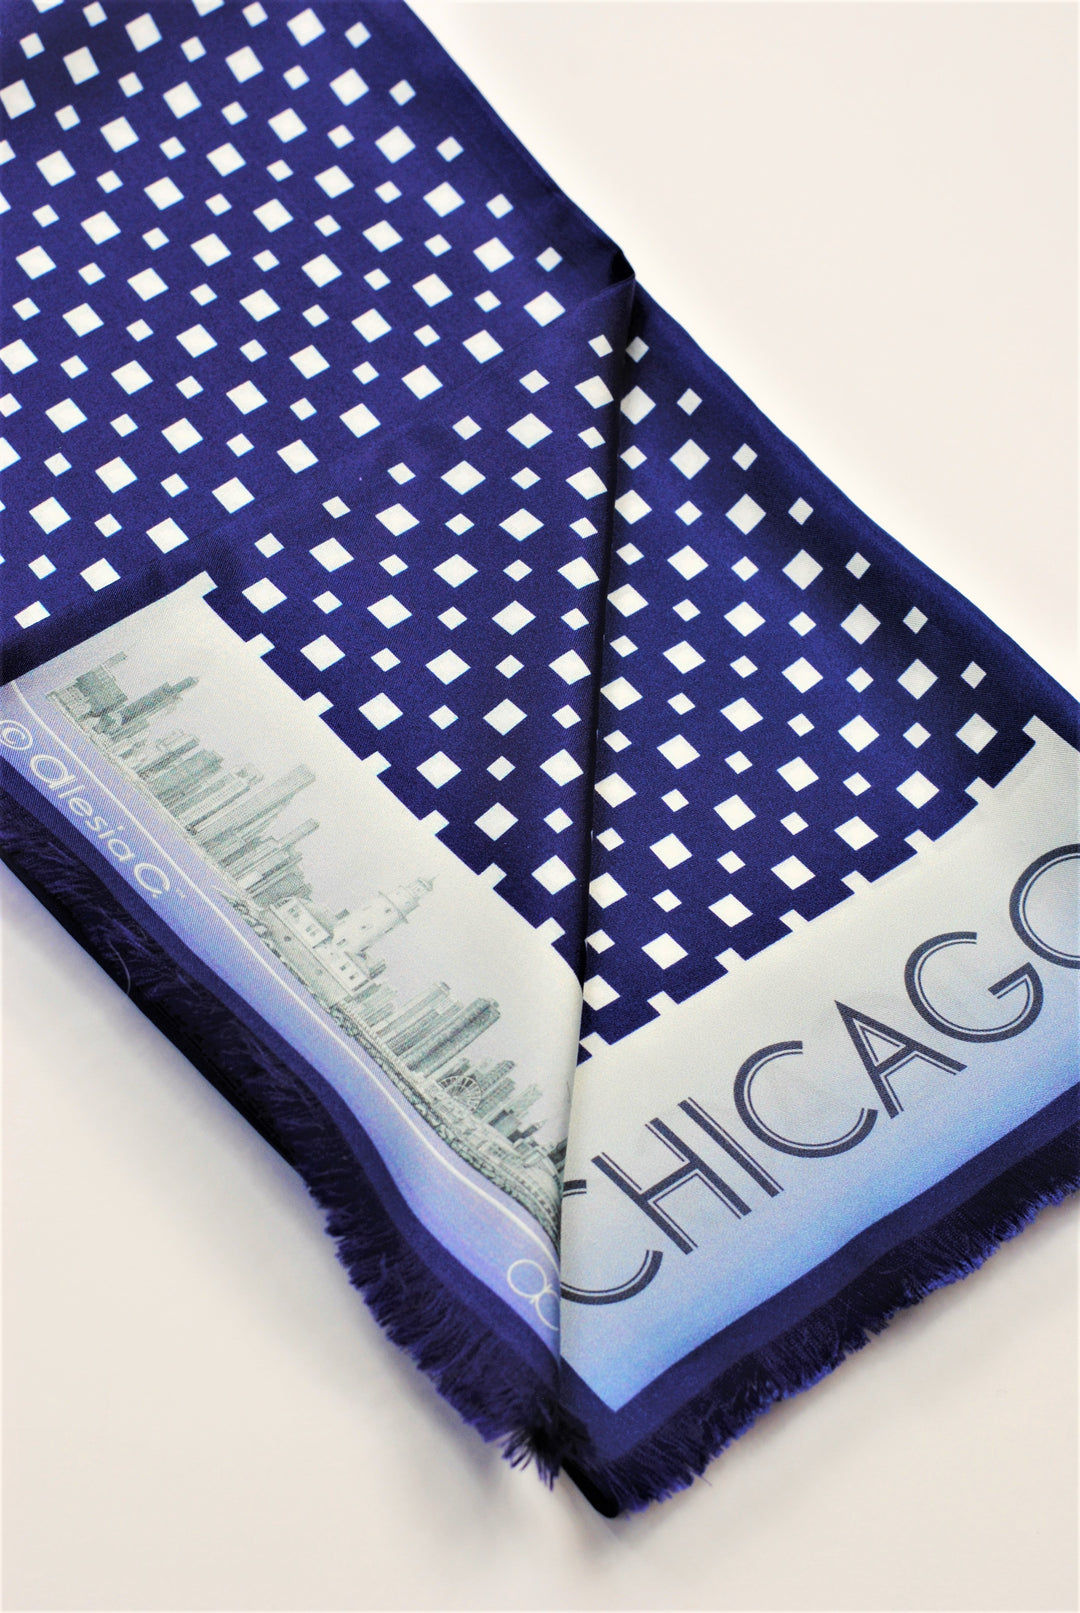 CHICAGO Skyline Art Pure Double Silk Scarf Navy Blue White Long by Alesia Chaika